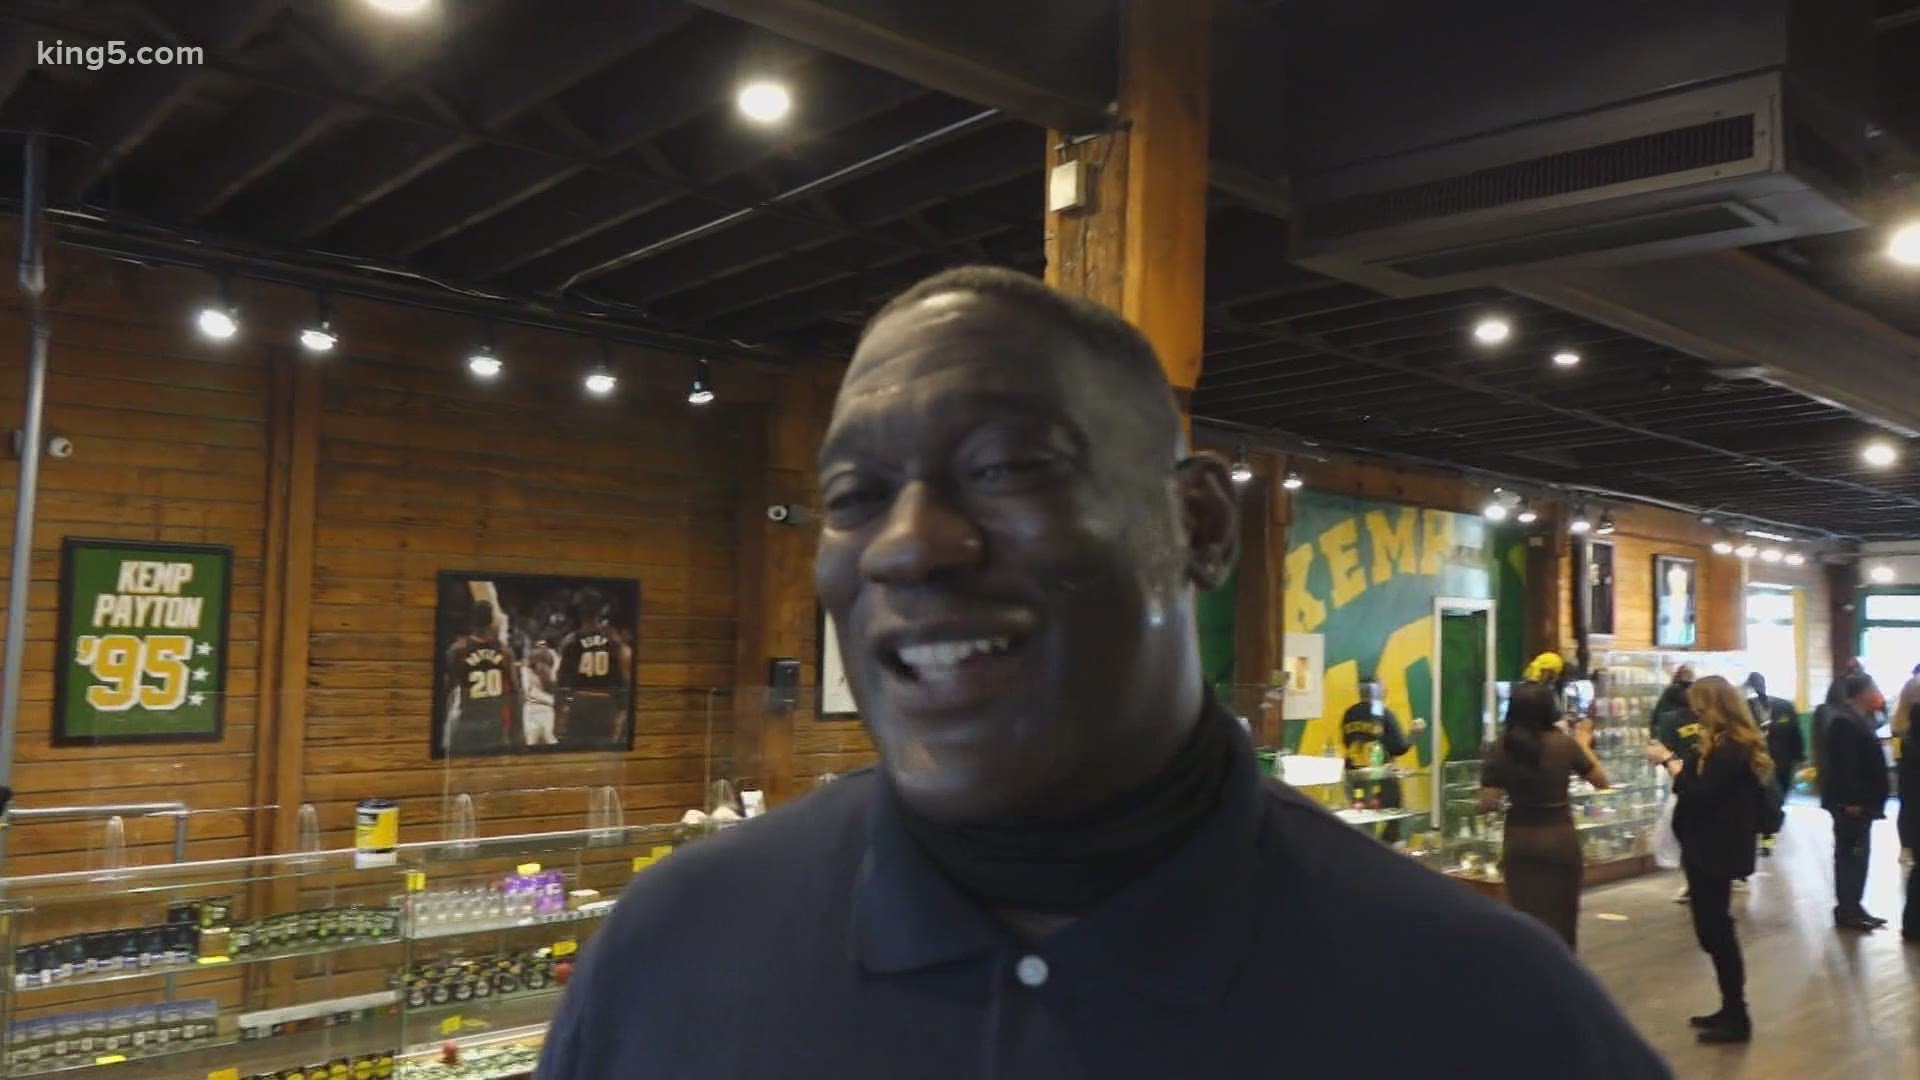 Shawn Kemp played for the Seattle SuperSonics for almost a decade. He opened Shawn Kemp's Cannabis in the city's Belltown neighborhood.